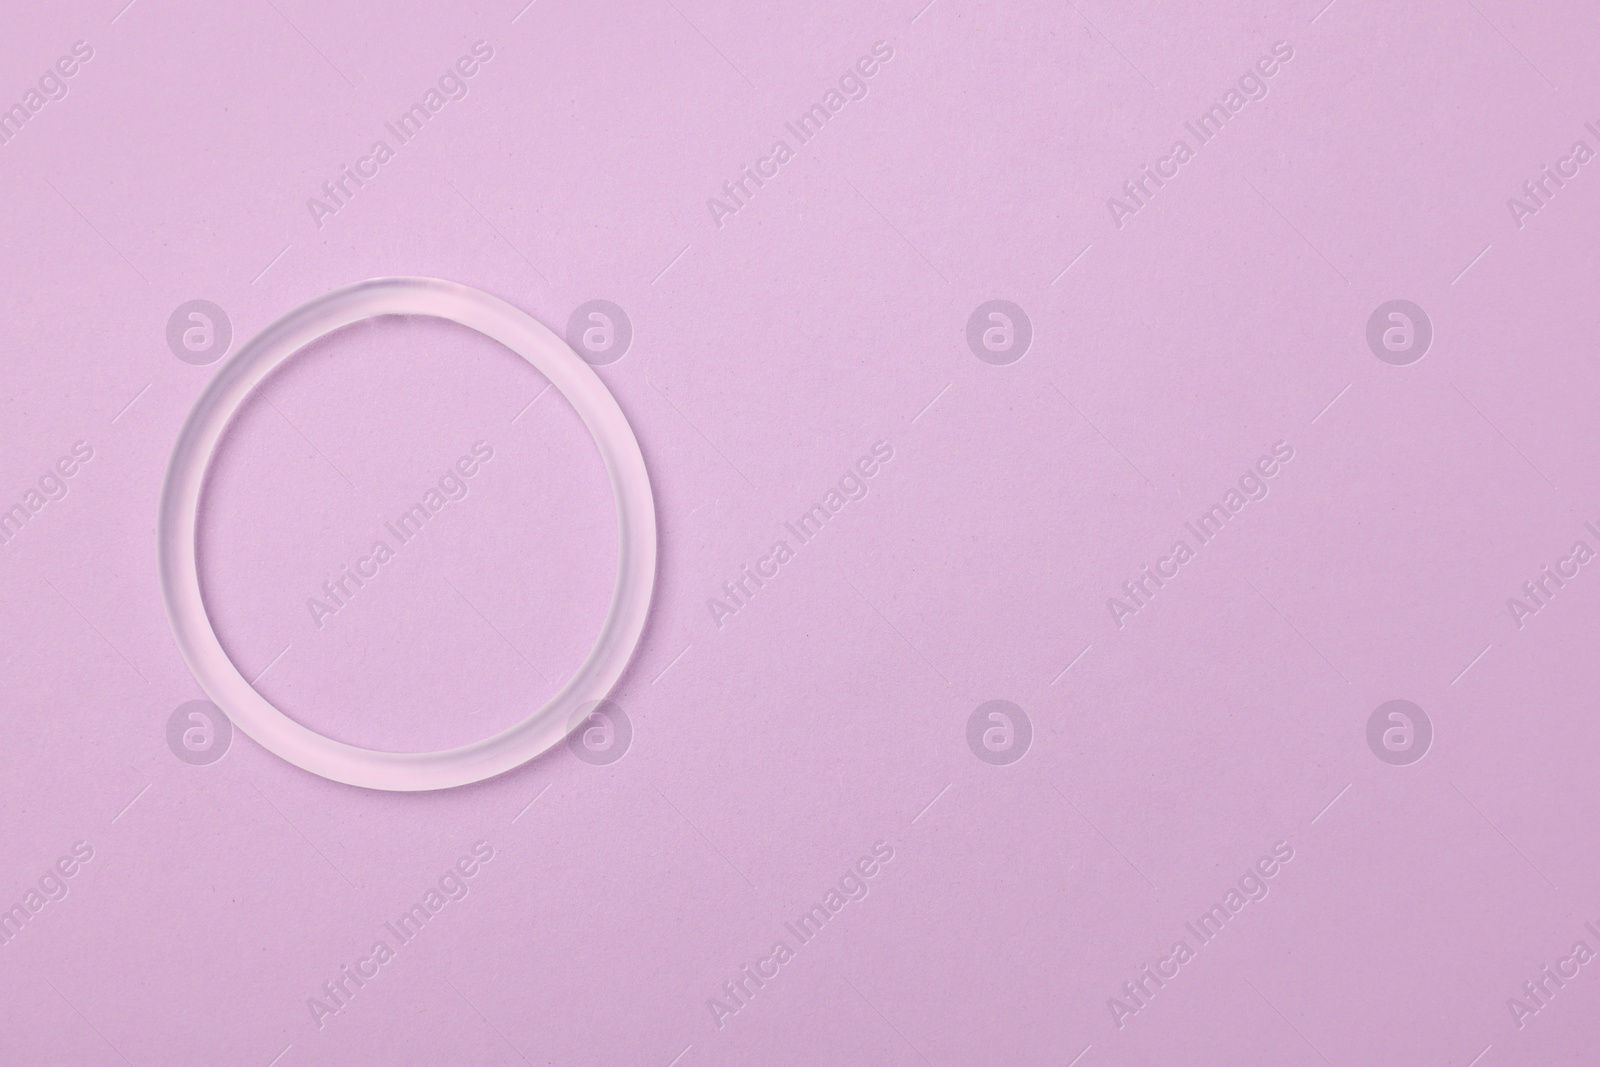 Photo of Diaphragm vaginal contraceptive ring on lilac background, top view. Space for text